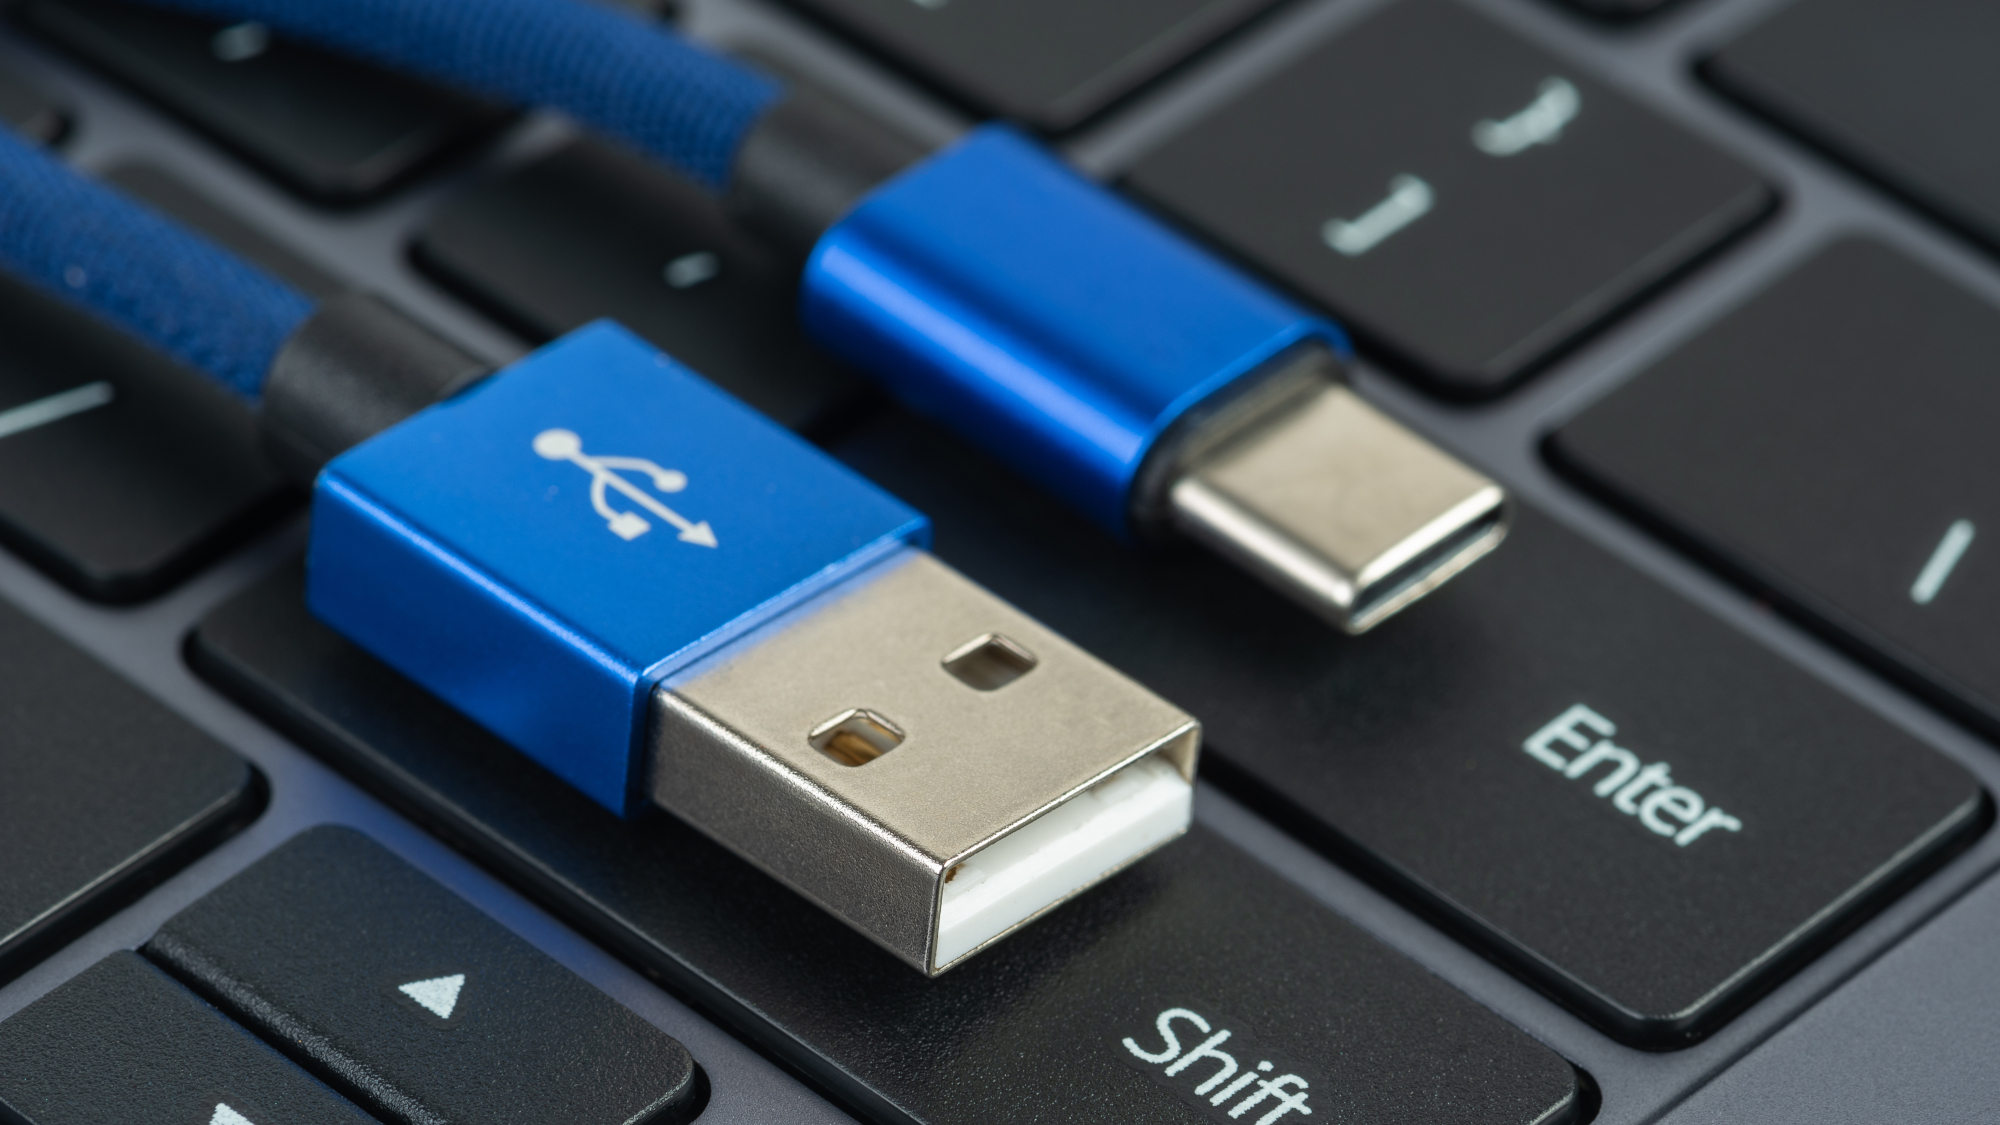 USB-A vs. USB-B vs. USB-C: What Are the Differences?, by AV Access